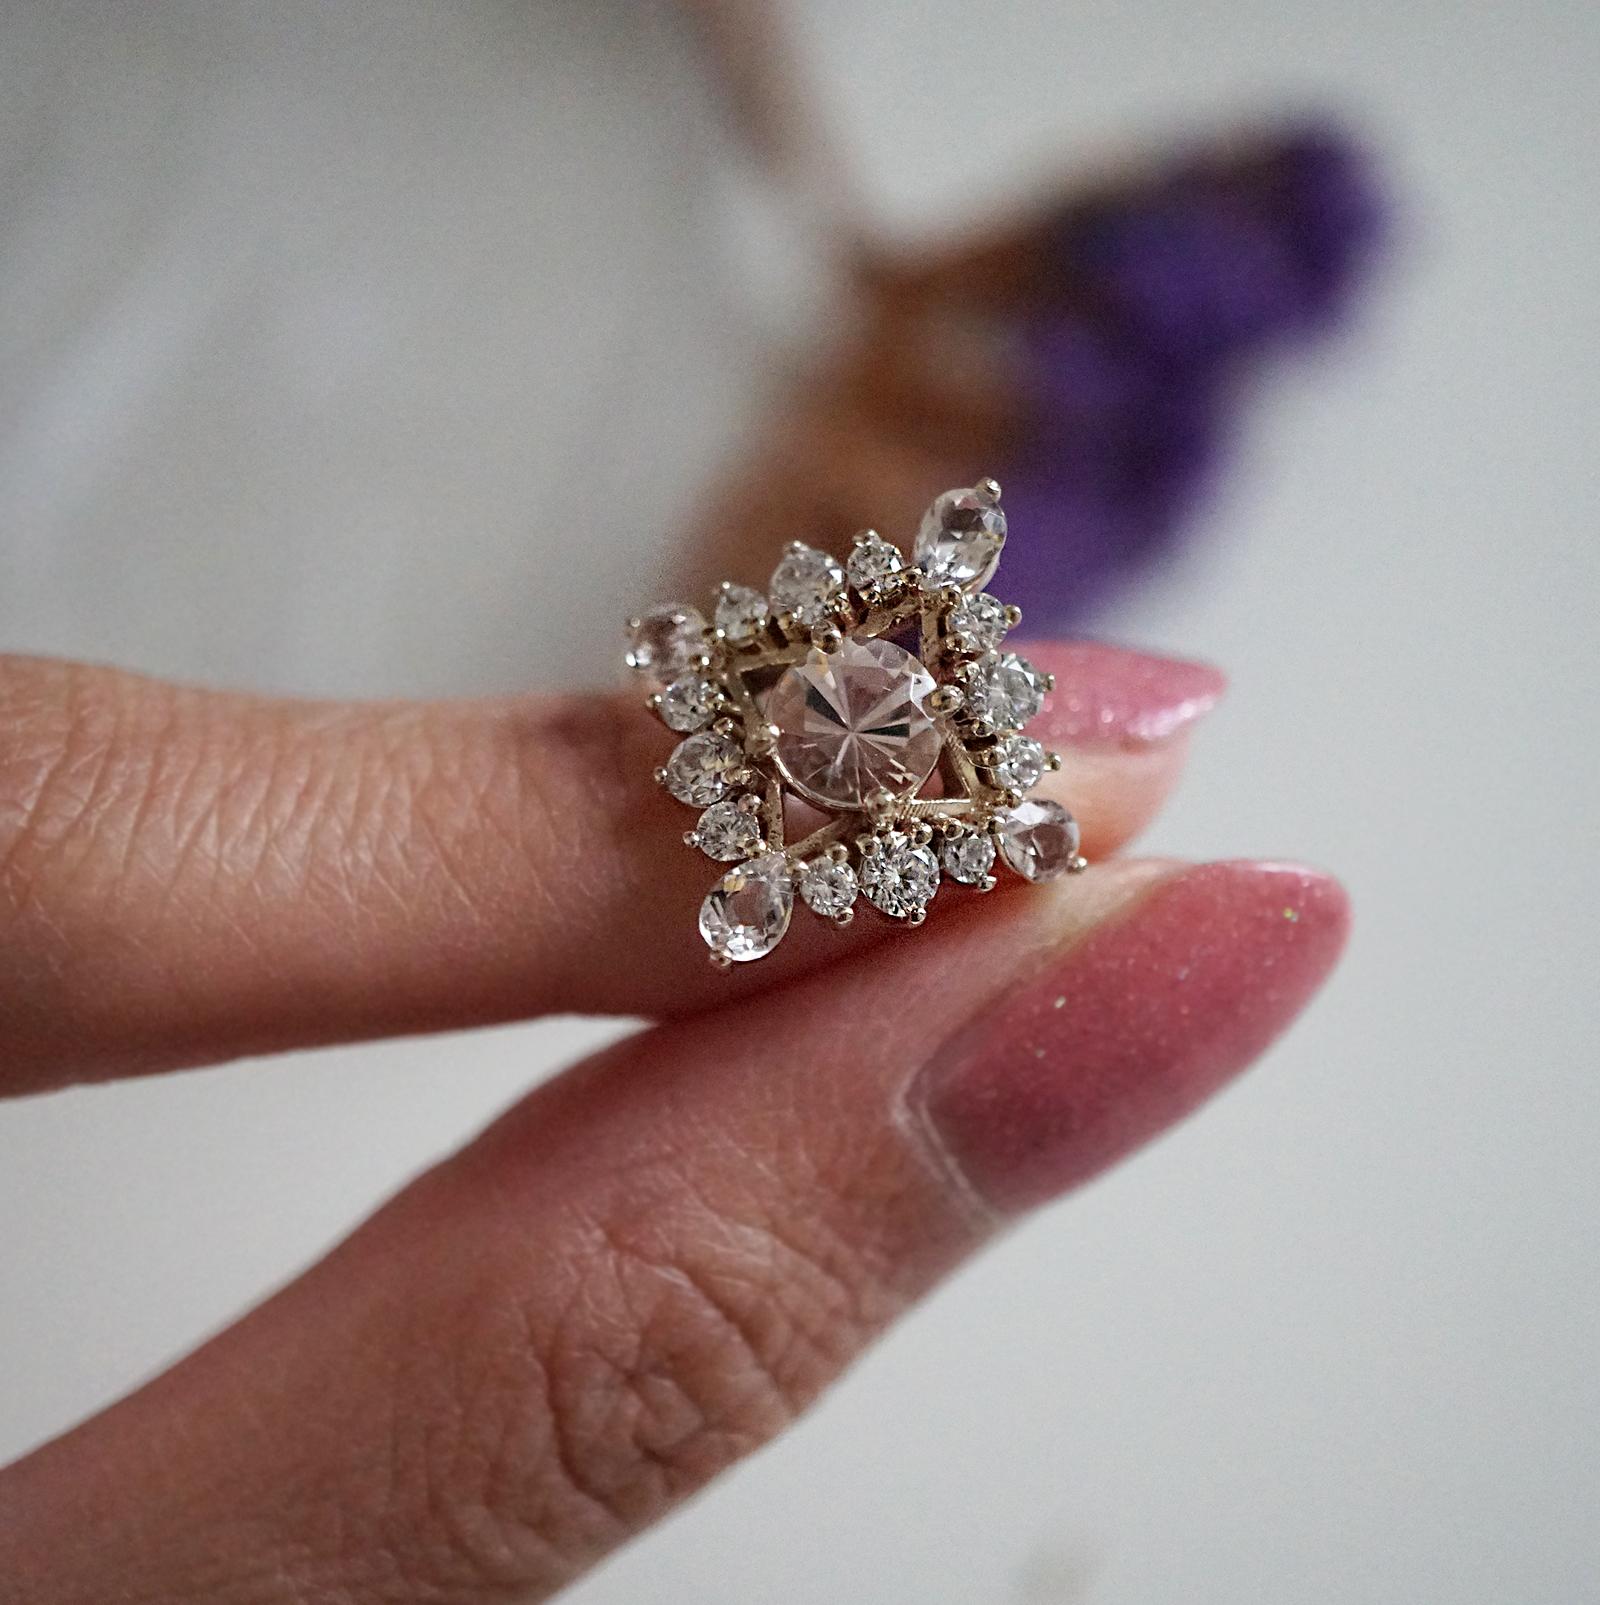 ** Tippy Taste Heirloom Collection are made-to-order. Please allow 3-4 week turnaround time. Make a note of your ring size and metal color during checkout. 

Inspired by Kate Middleton's elegance. This morganite diamond ring designs embodied her